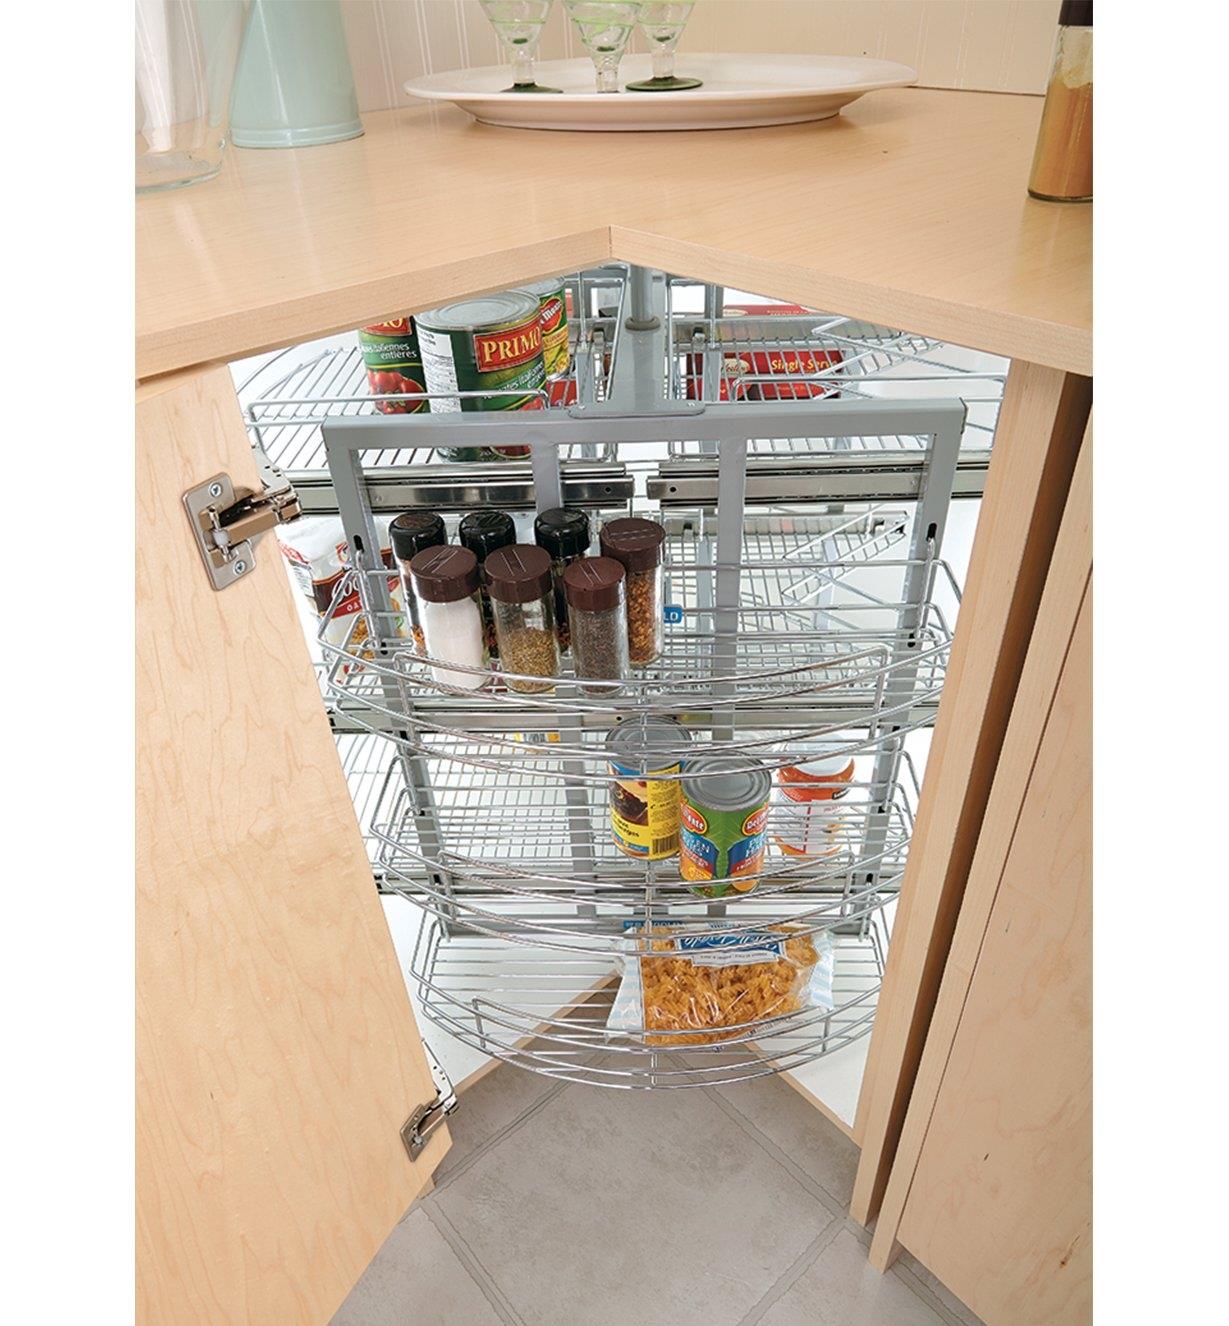 Pull-Out Corner Carousel installed in a cabinet, rotated to access food at the back